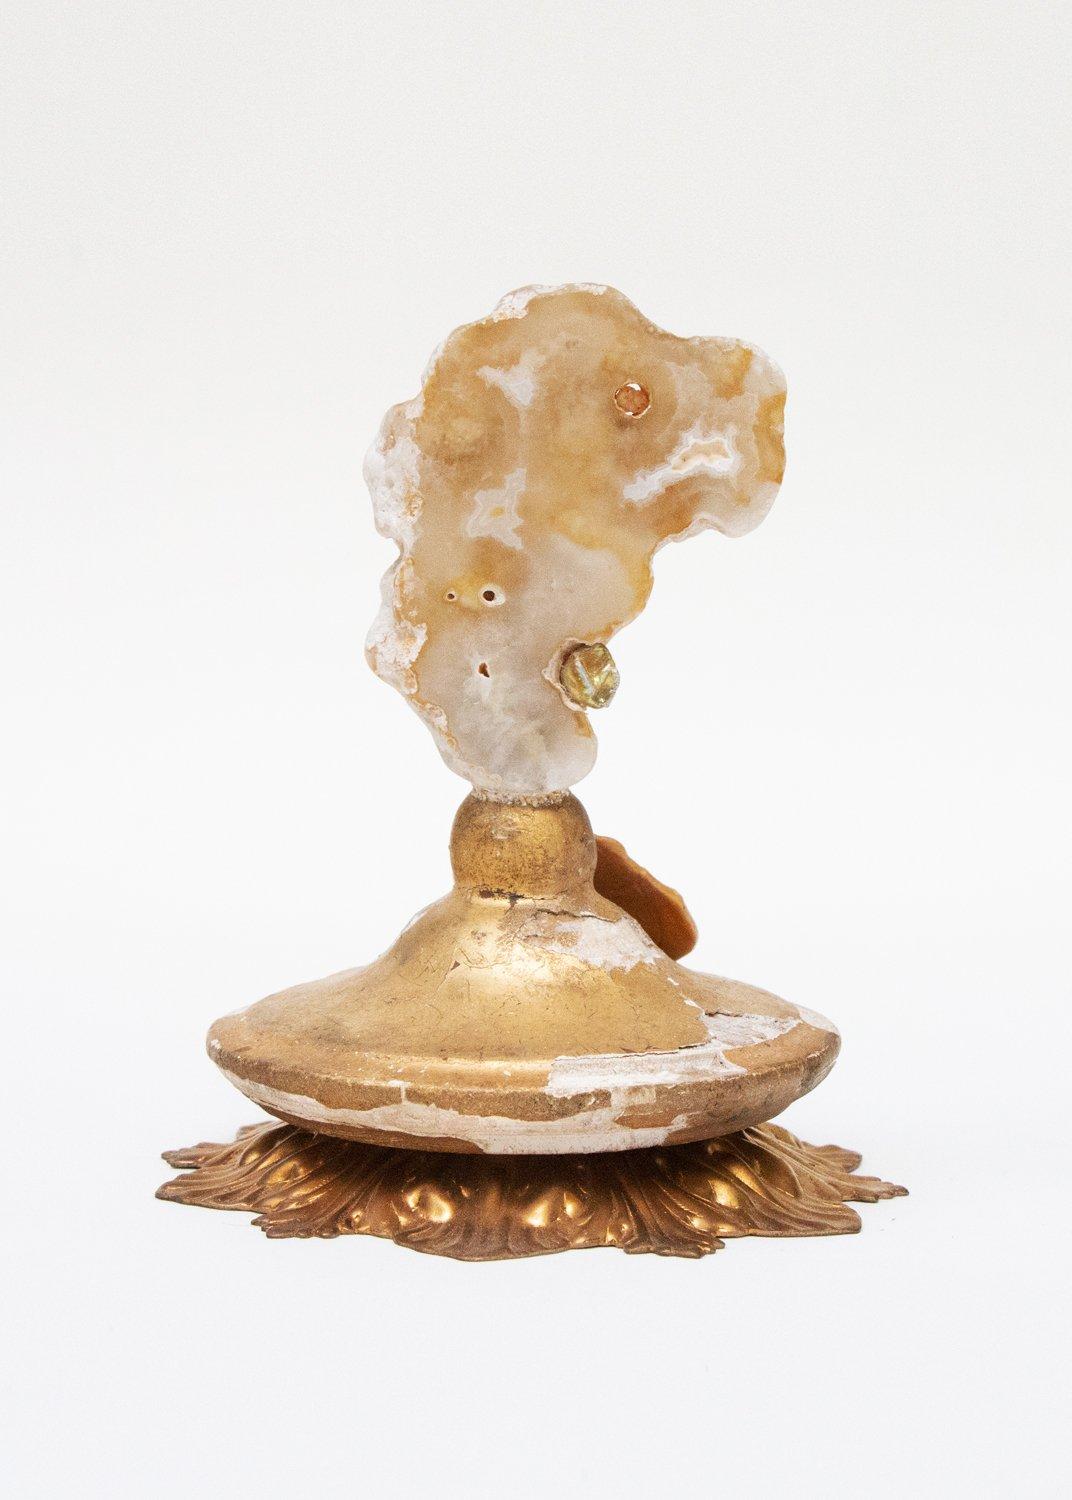 A pair of 18th-century Italian candlestick tops, with polished agate coral and a baroque pearl.

The hand-carved, gold leaf candlestick tops originally came from a pair of candlesticks from a church in Tuscany. They stand on antique metal drip pan